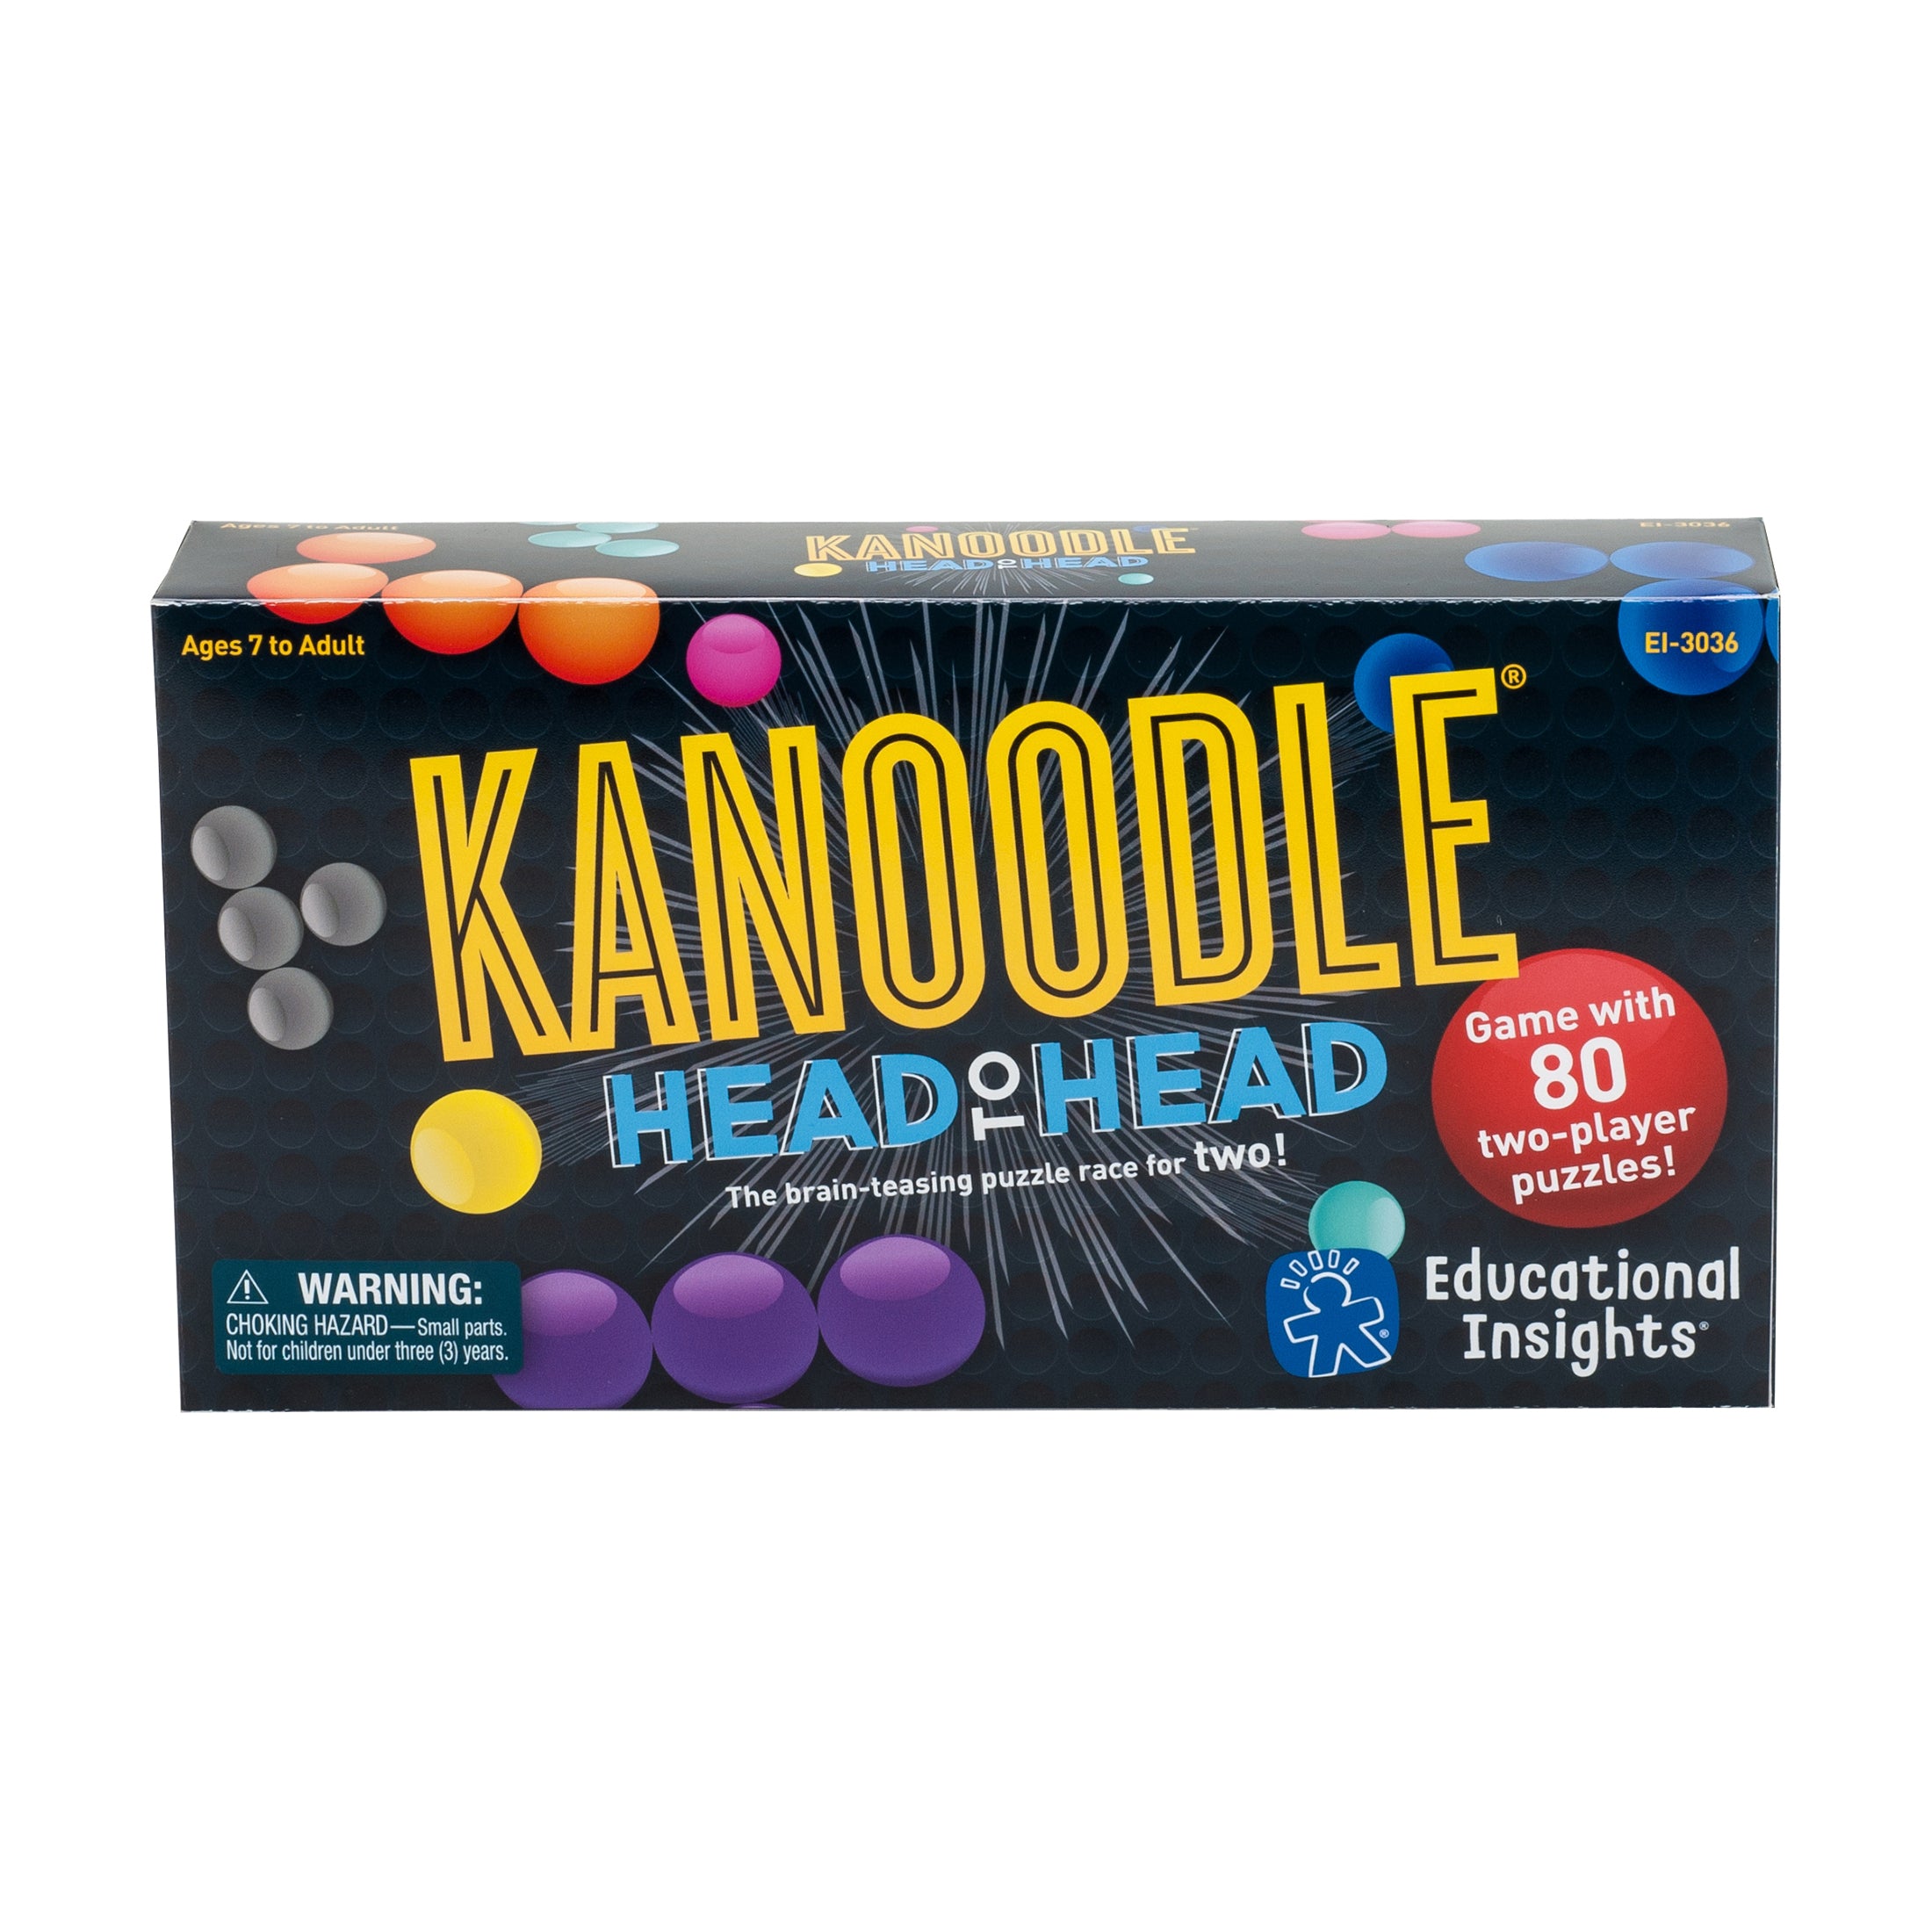 Kanoodle Extreme Puzzle Game, Brain Teaser Puzzle Challenge Game, Gift for  Ag